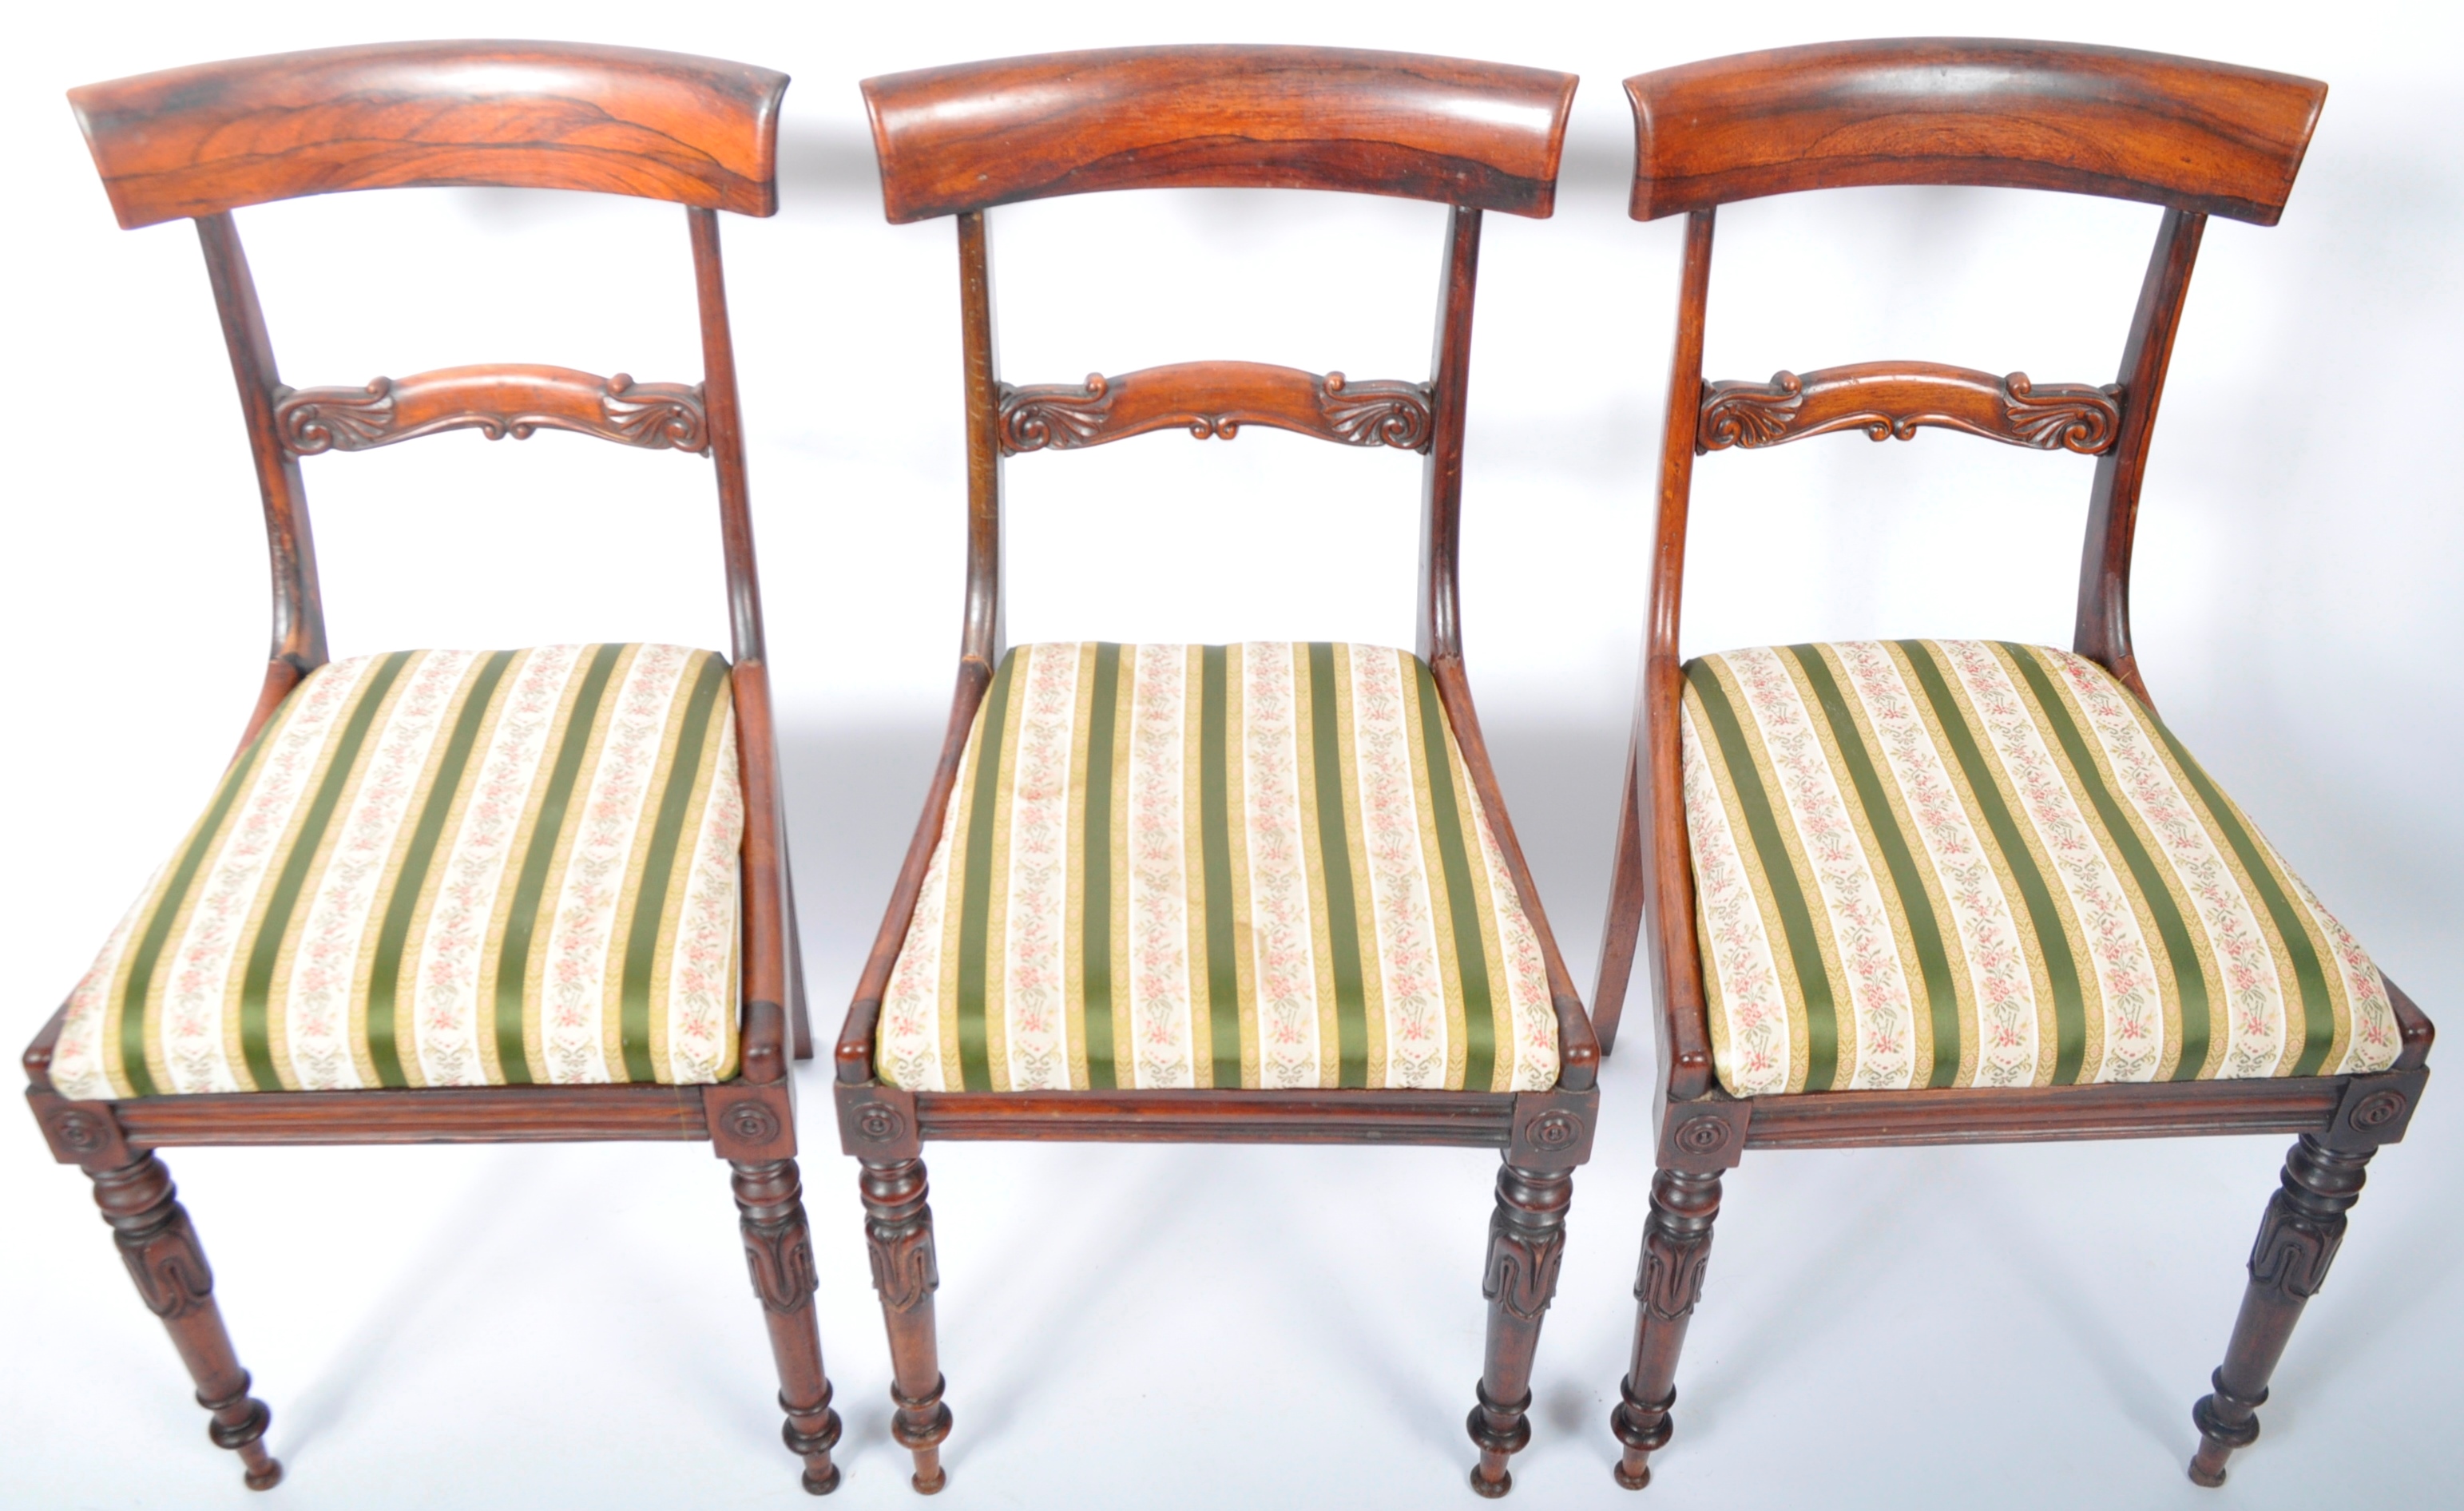 SET OF SIX ANTIQUE ROSEWOOD DINING CHAIRS IN THE GILLOWS STYLE - Image 2 of 12